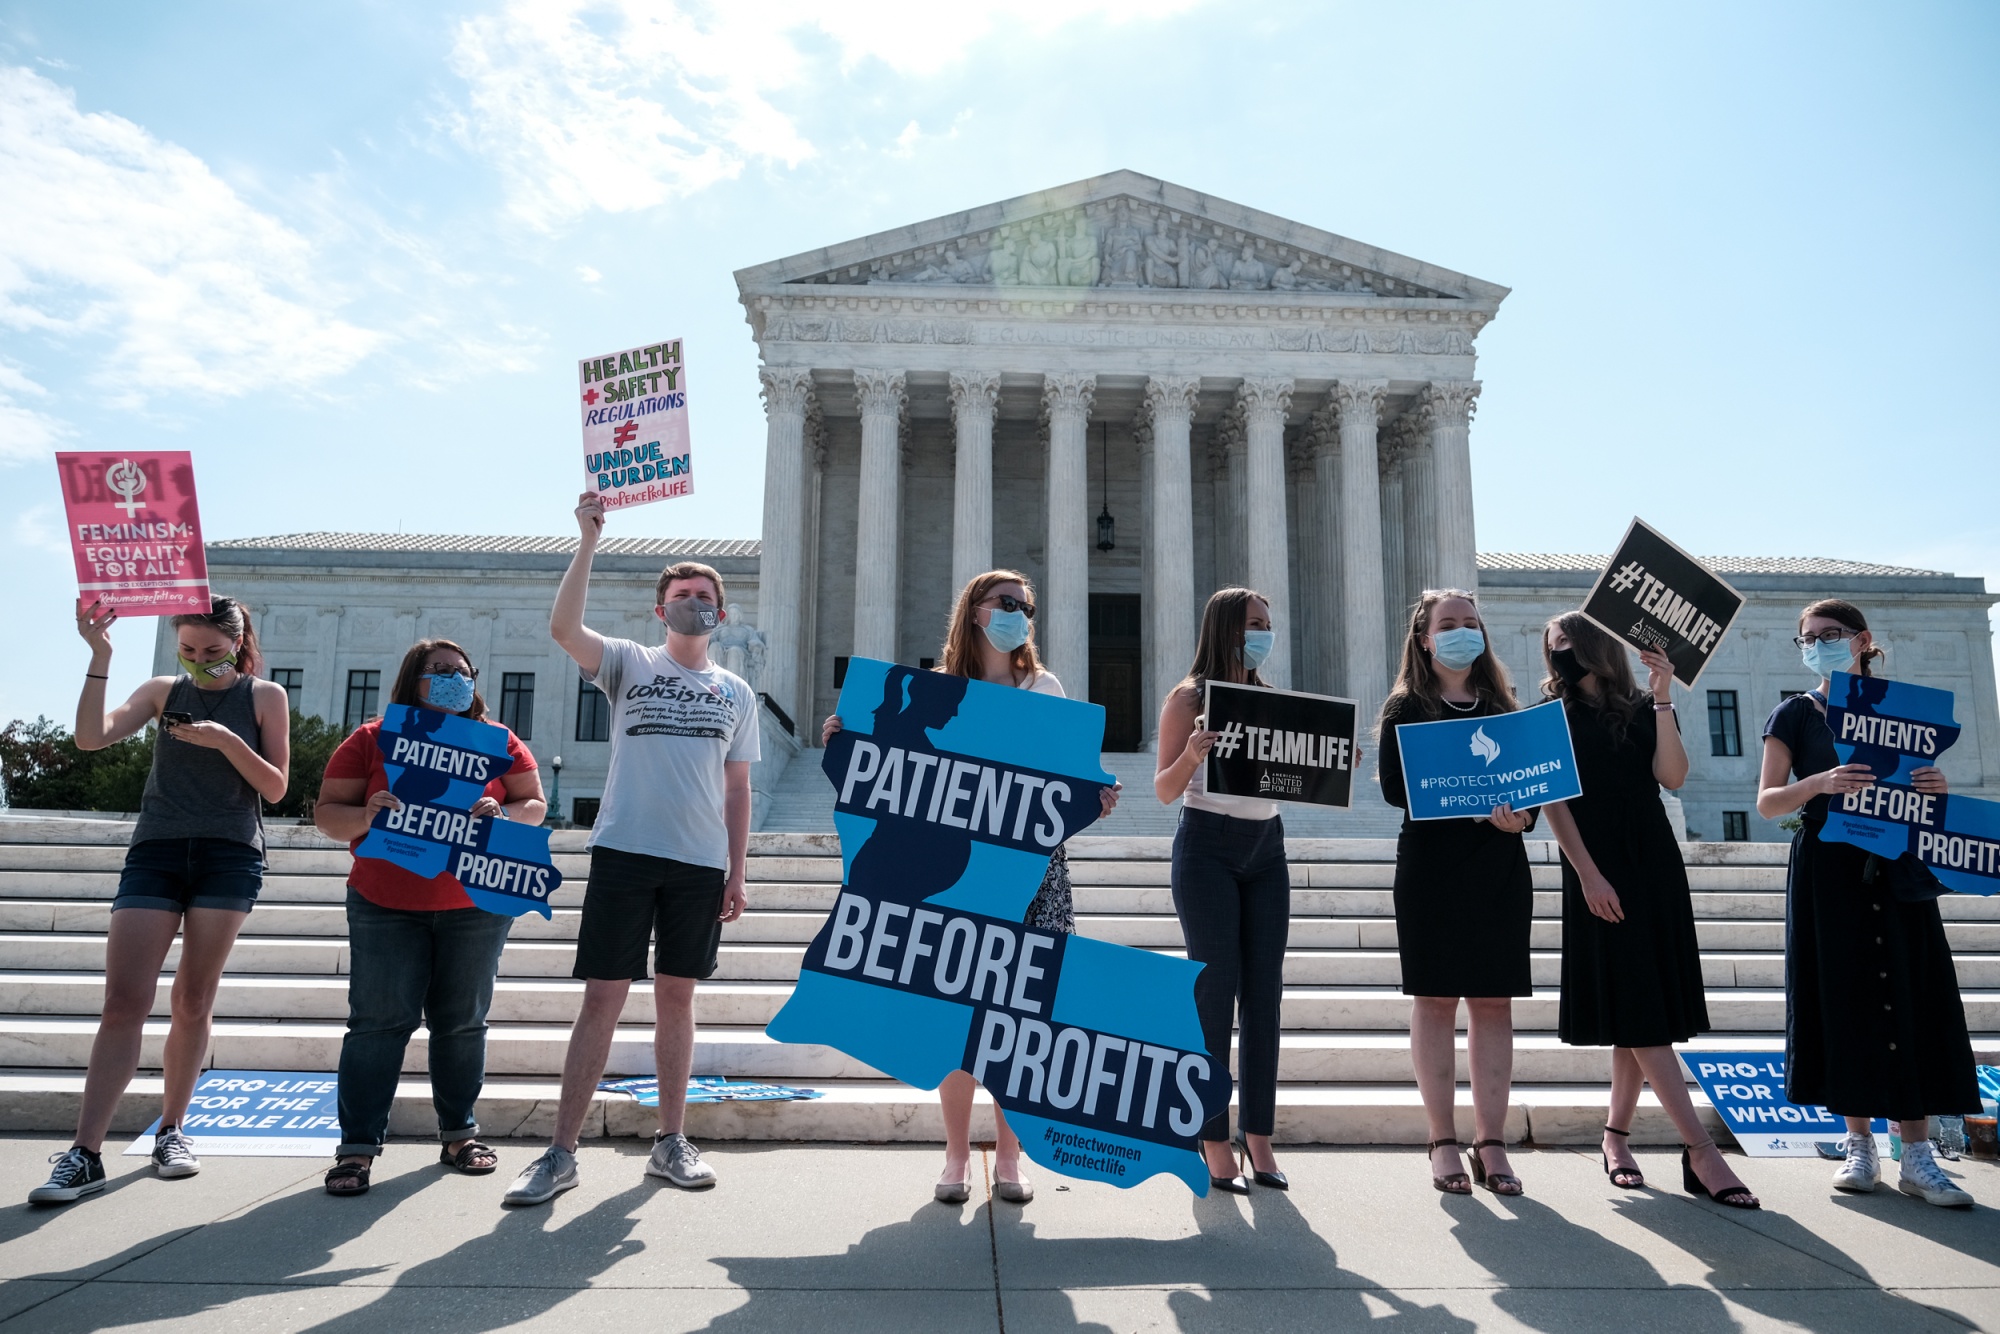 Pro-life activists&nbsp;in front of the U.S. Supreme Court June 25, 2020 in Washington, DC.&nbsp;